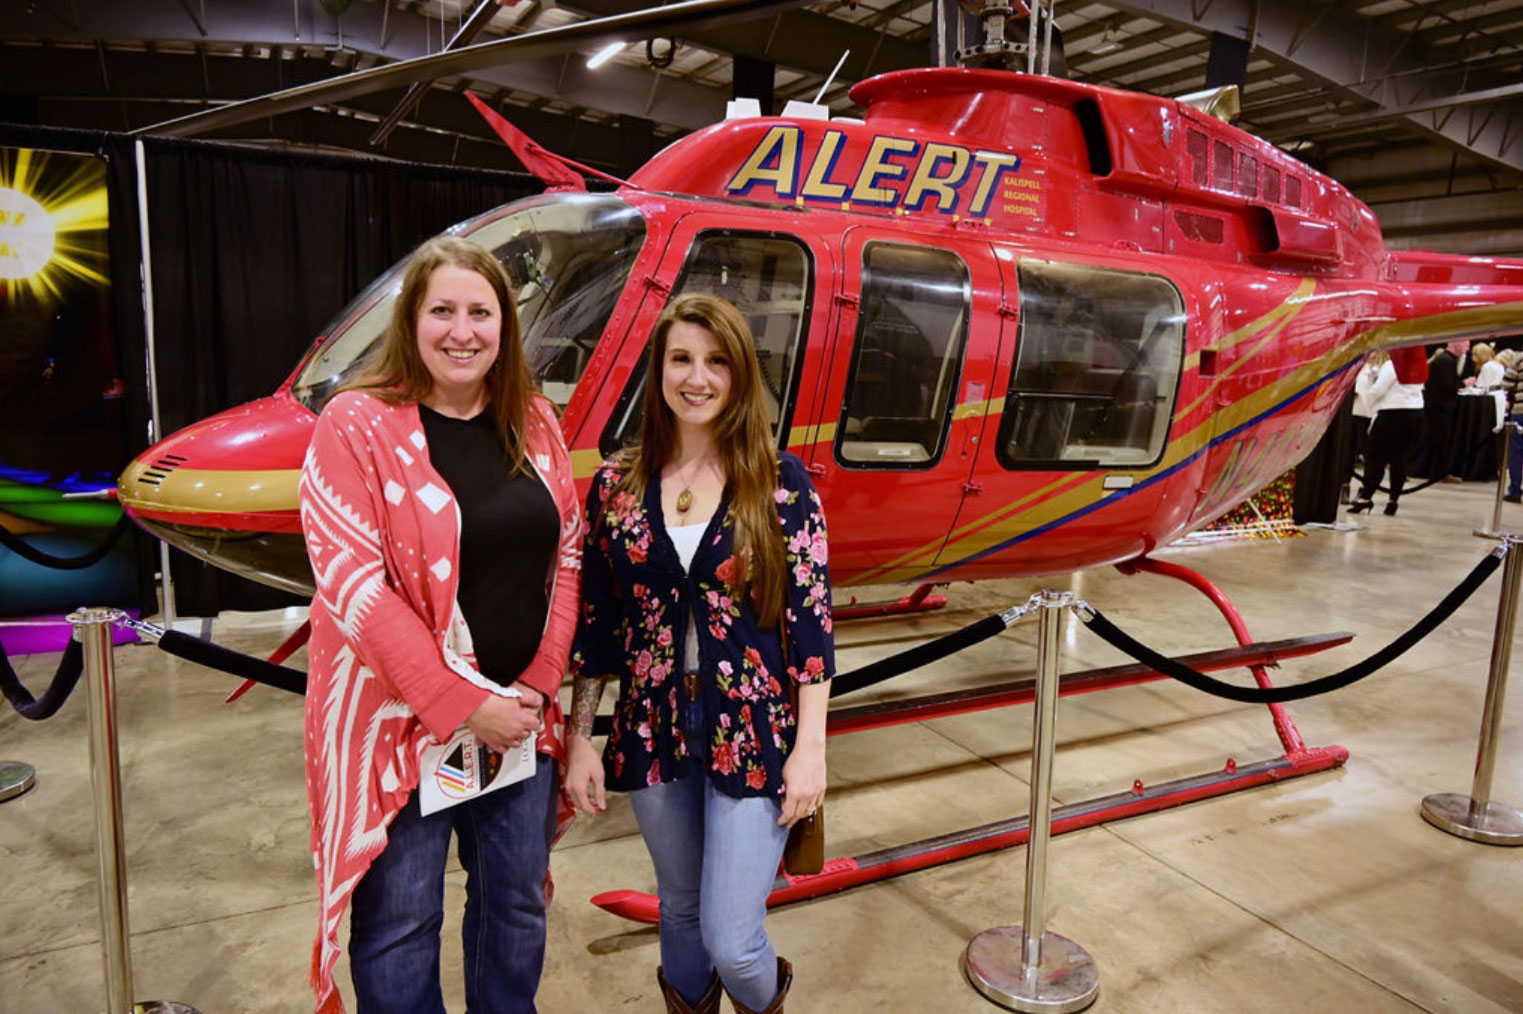 Employees standing next to mercy flight helicopter